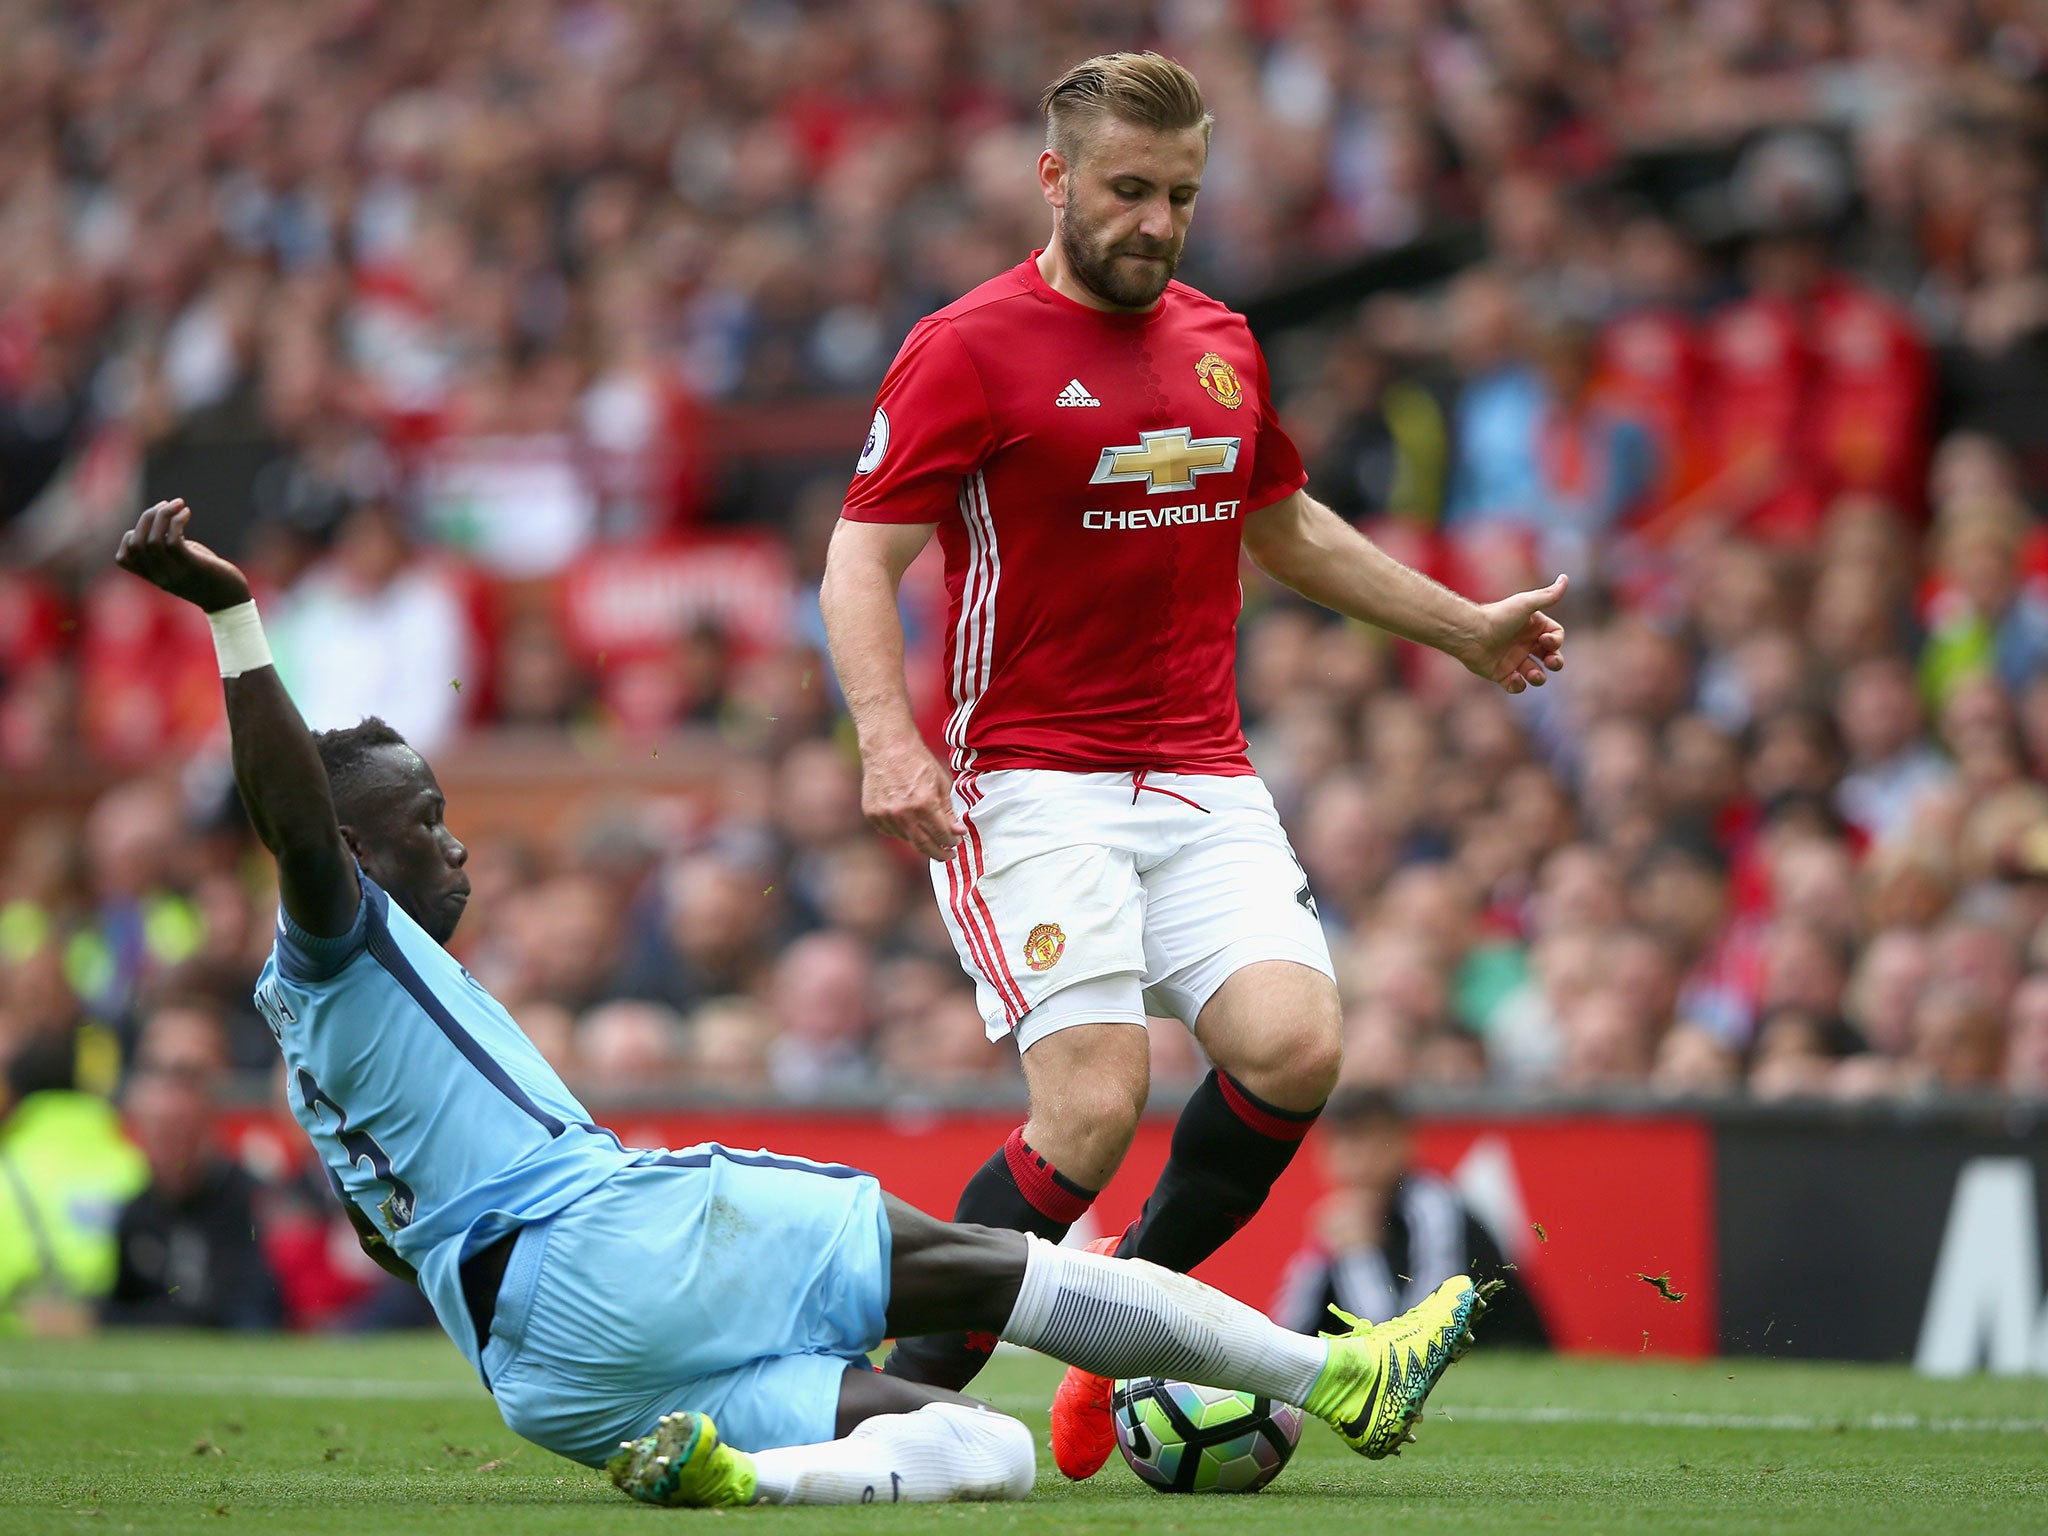 Shaw in action for United against rivals City in the first Manchester derby of the season